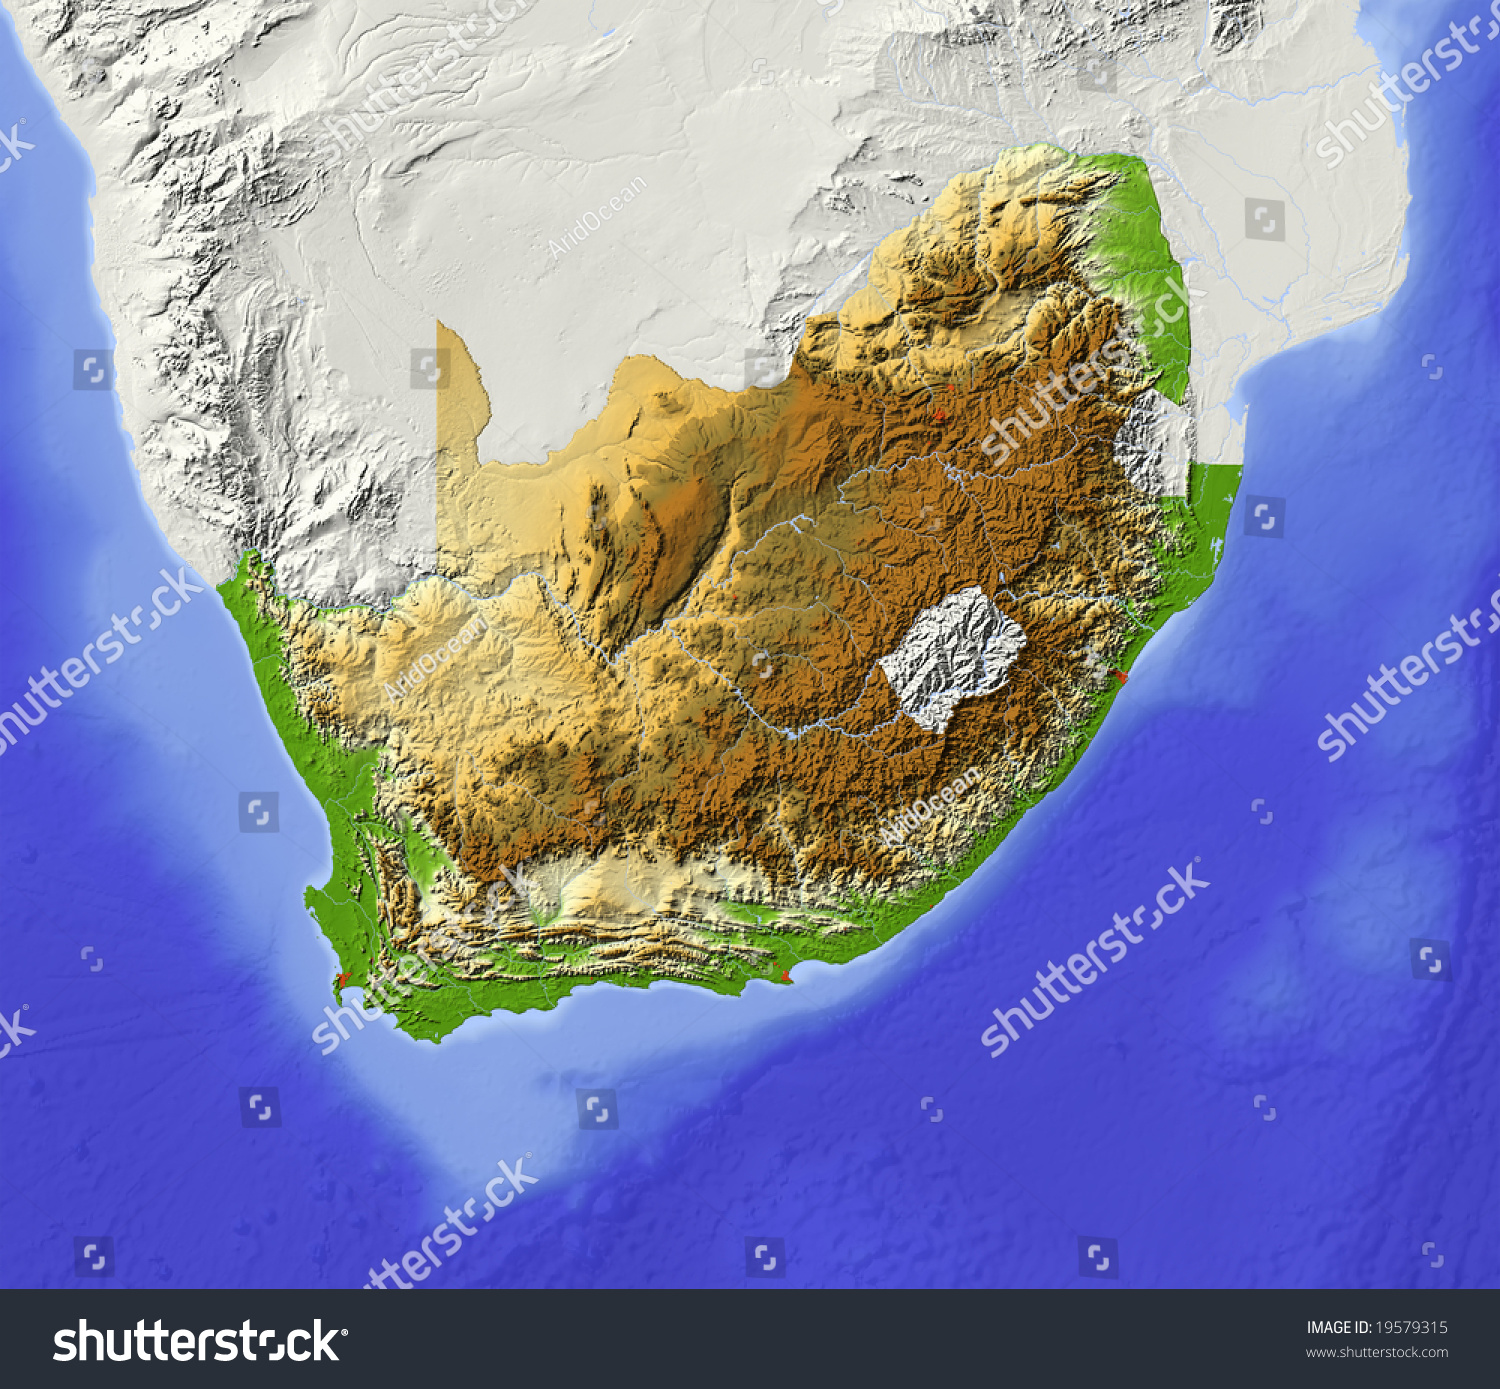 Detailed Political Map Of South Africa With Relief So - vrogue.co